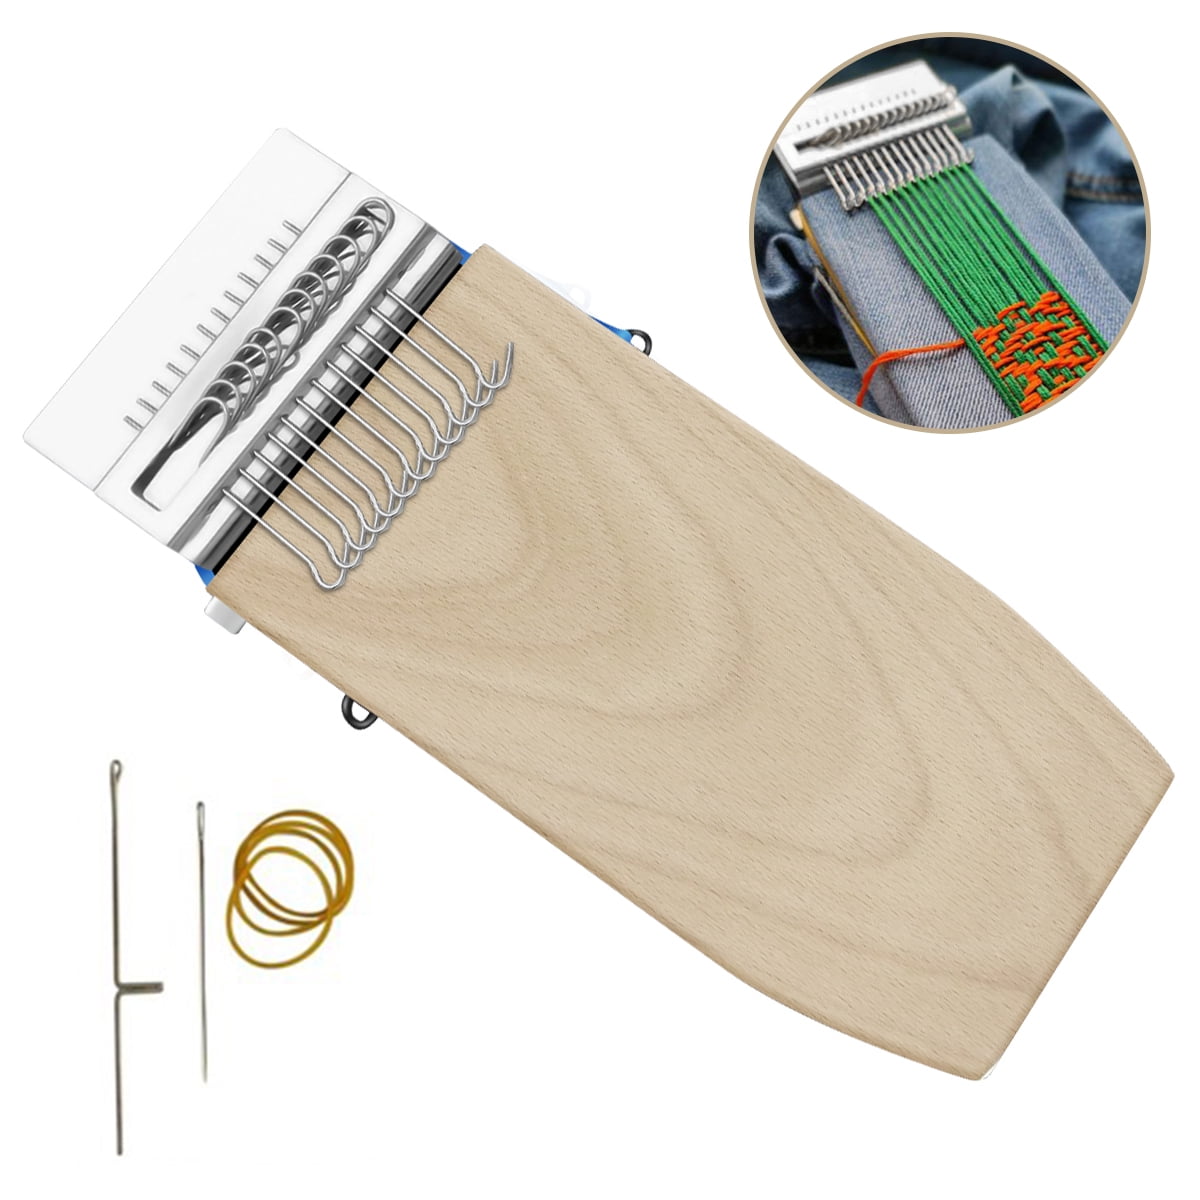 Small Loom-Speedweve Type Weave Tool Wooden Multi-craft Darning Machine Loom Wooden Mini Weaving Loom Diy Mending Loom For Quickly And Easily Mended And Create Patterns On Jeans And Clothes 